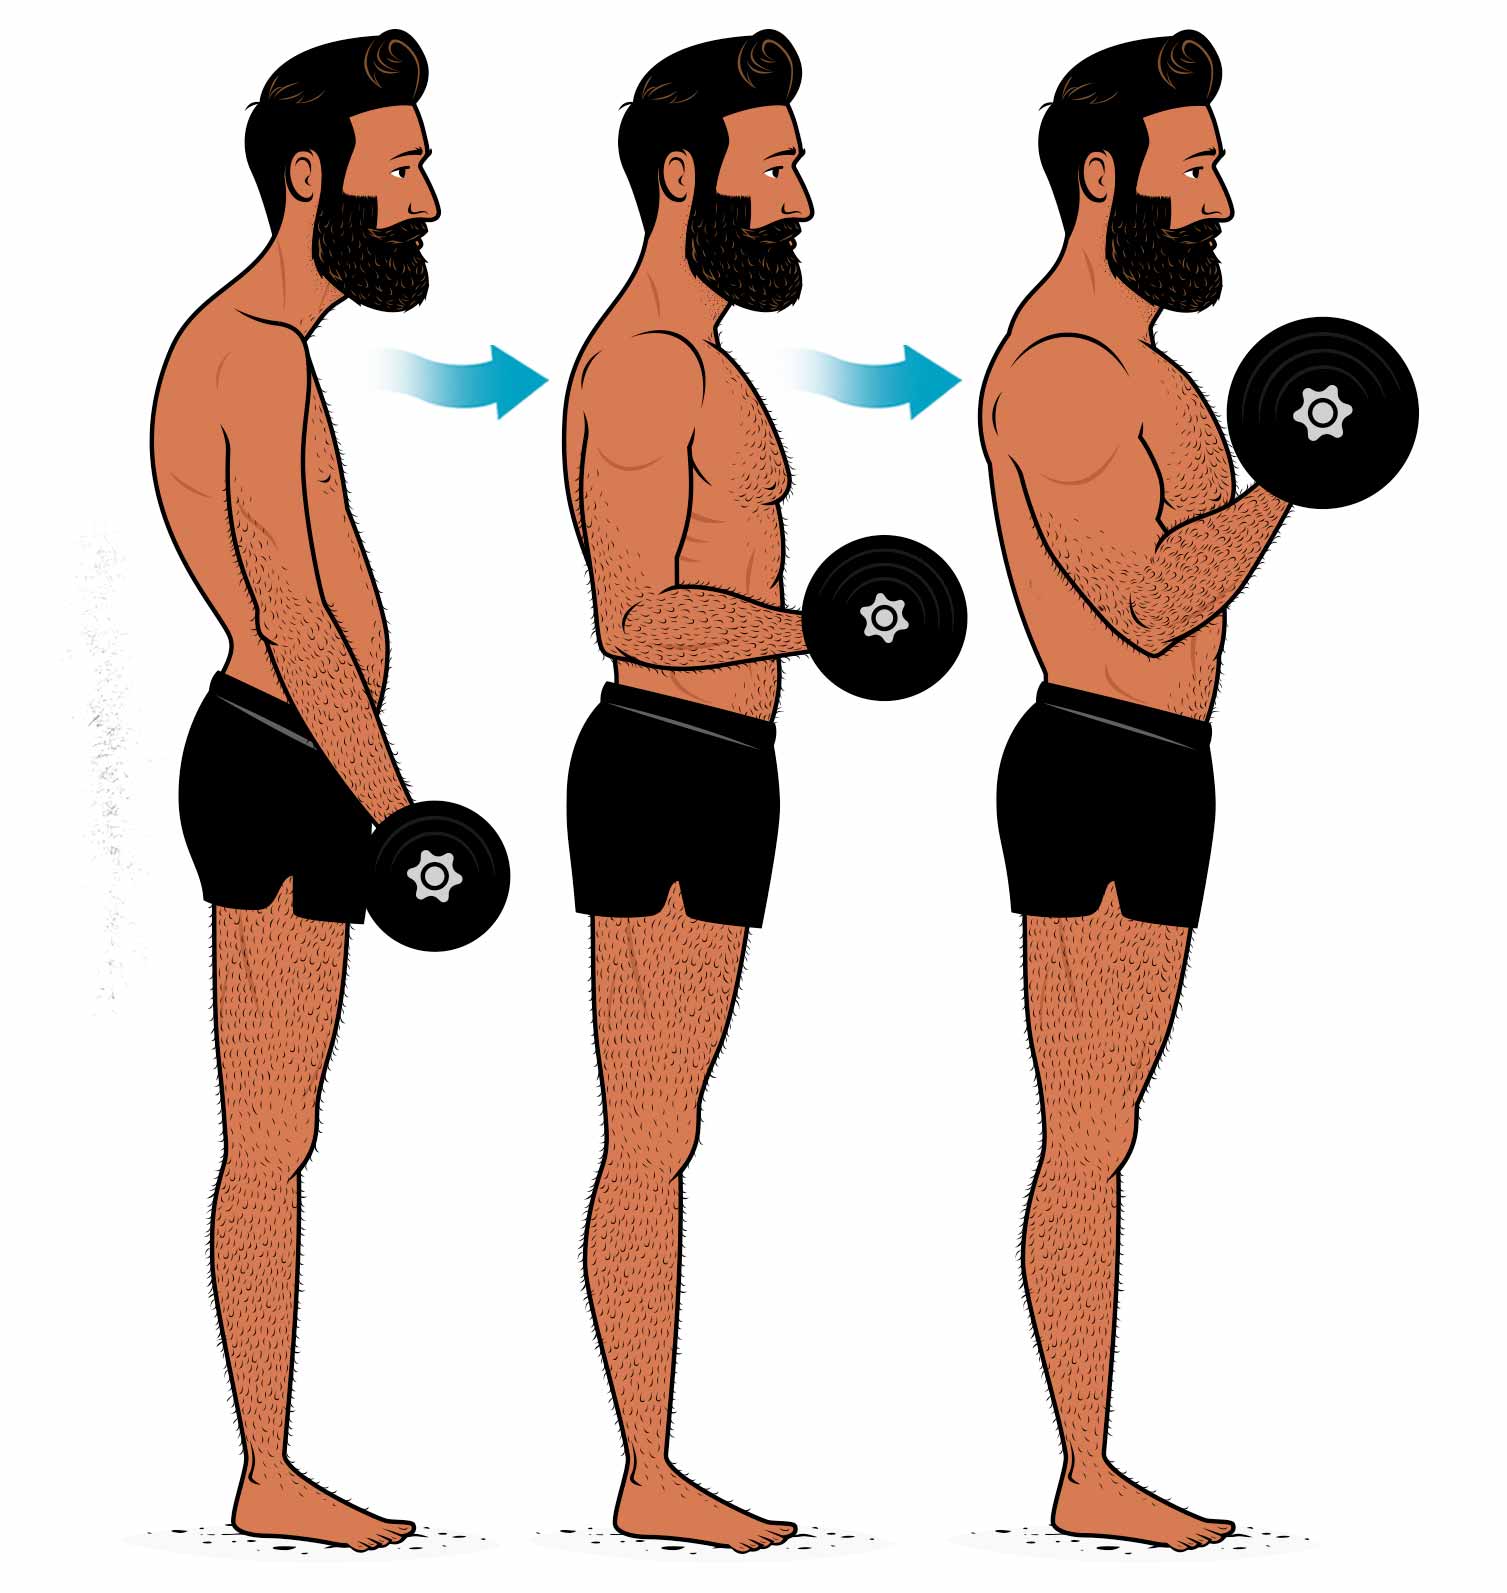 Outlift Illustration of a bodybuilder doing hypertrophy training to build muscle.